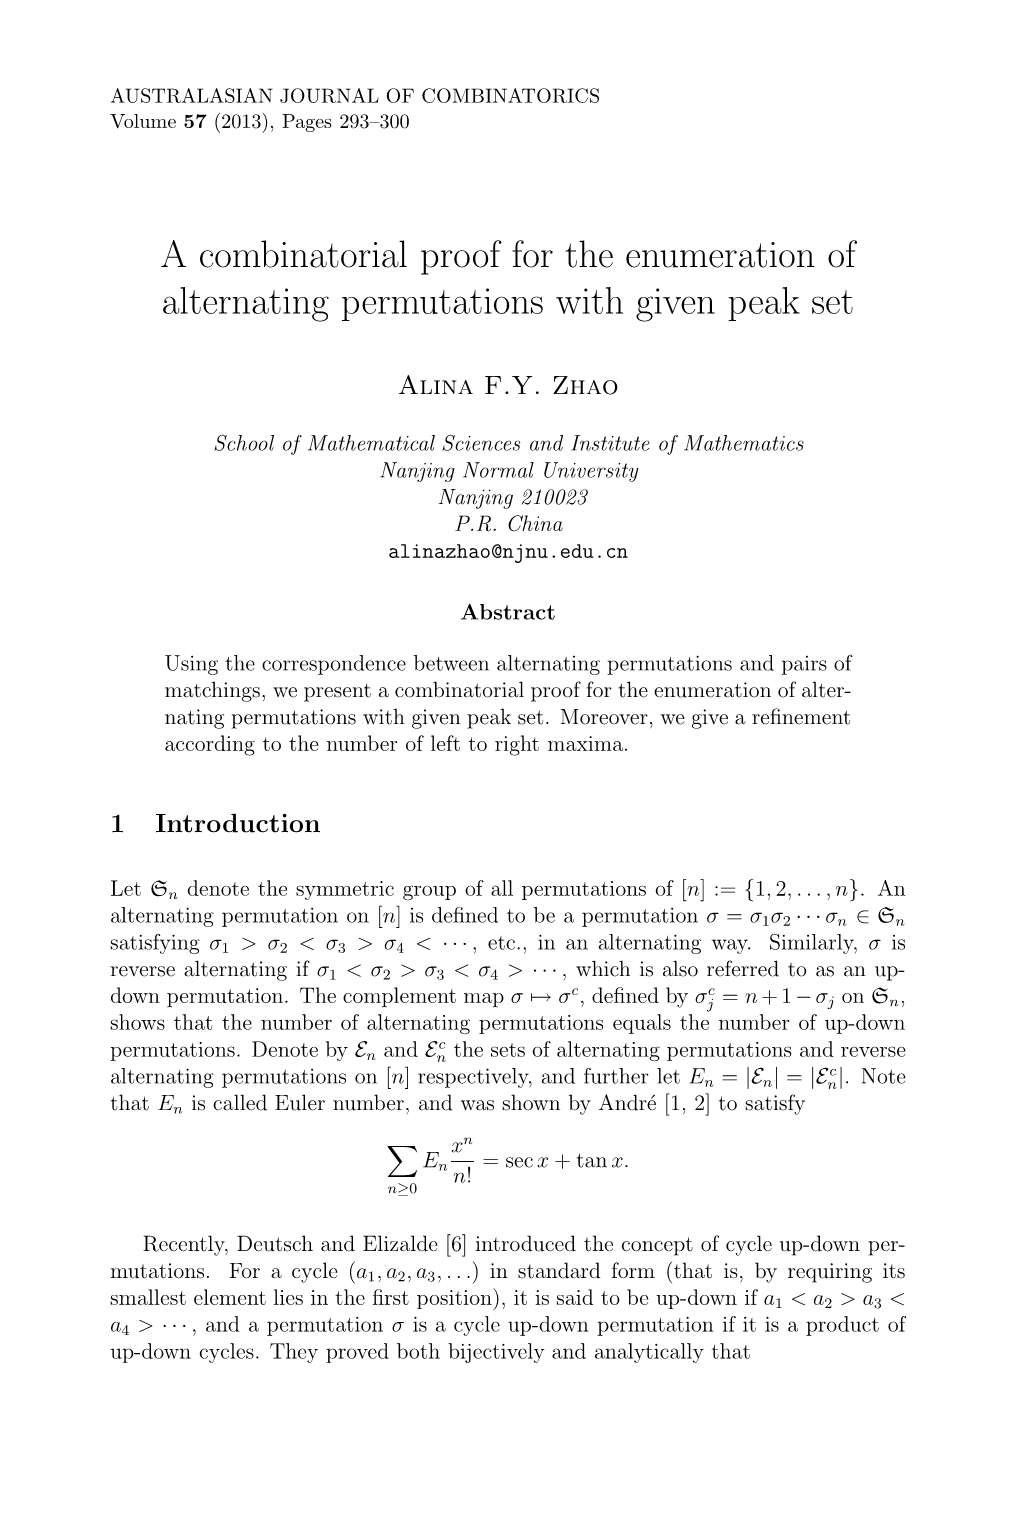 A Combinatorial Proof for the Enumeration of Alternating Permutations with Given Peak Set